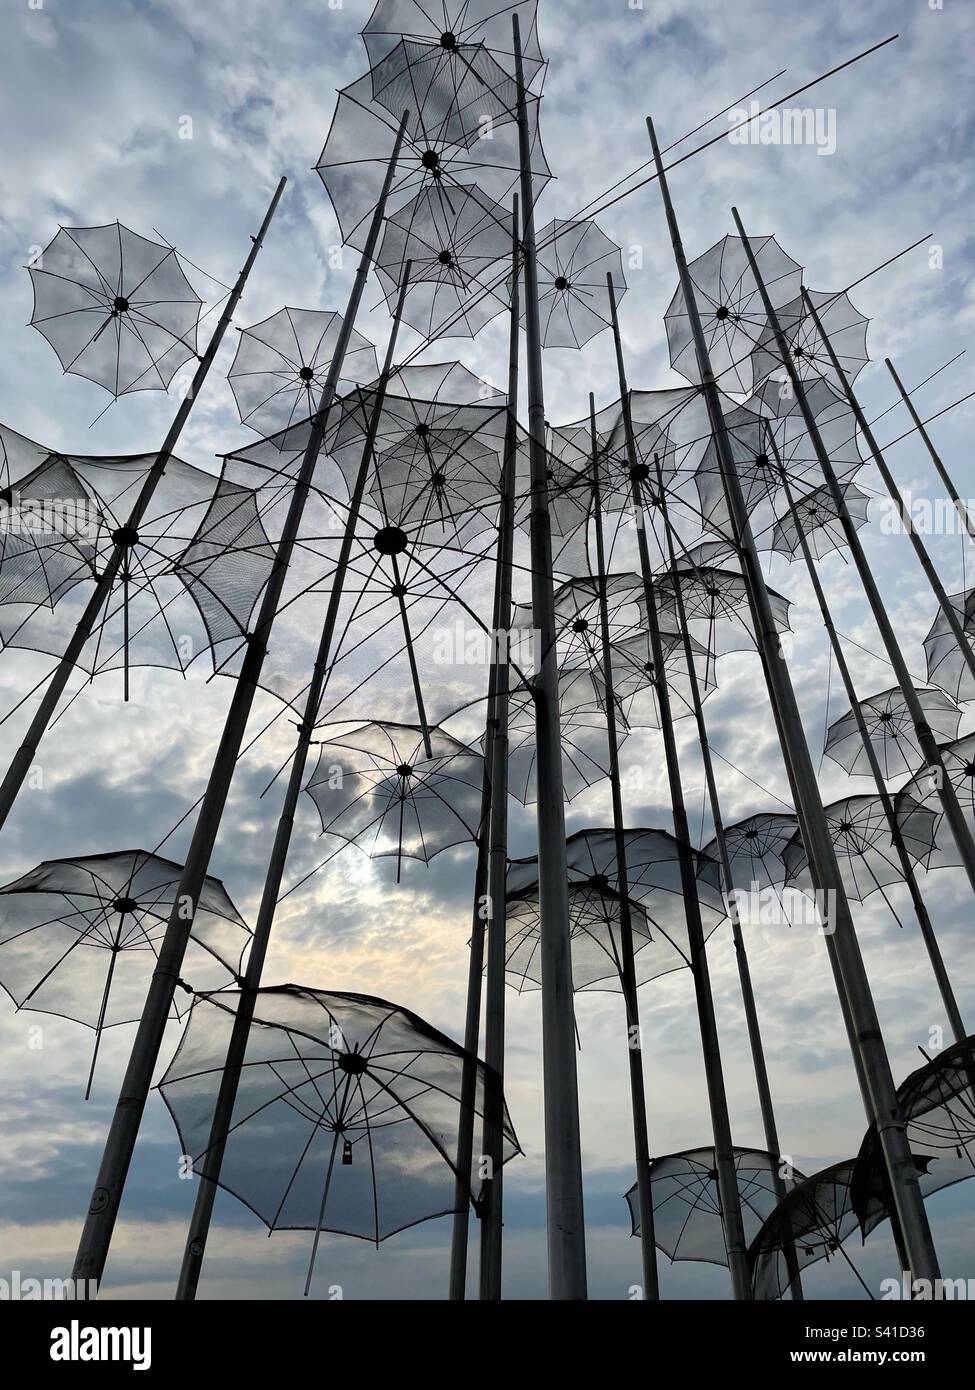 The Umbrellas by Zongolopoulos in Thessaloniki Stock Photo - Alamy